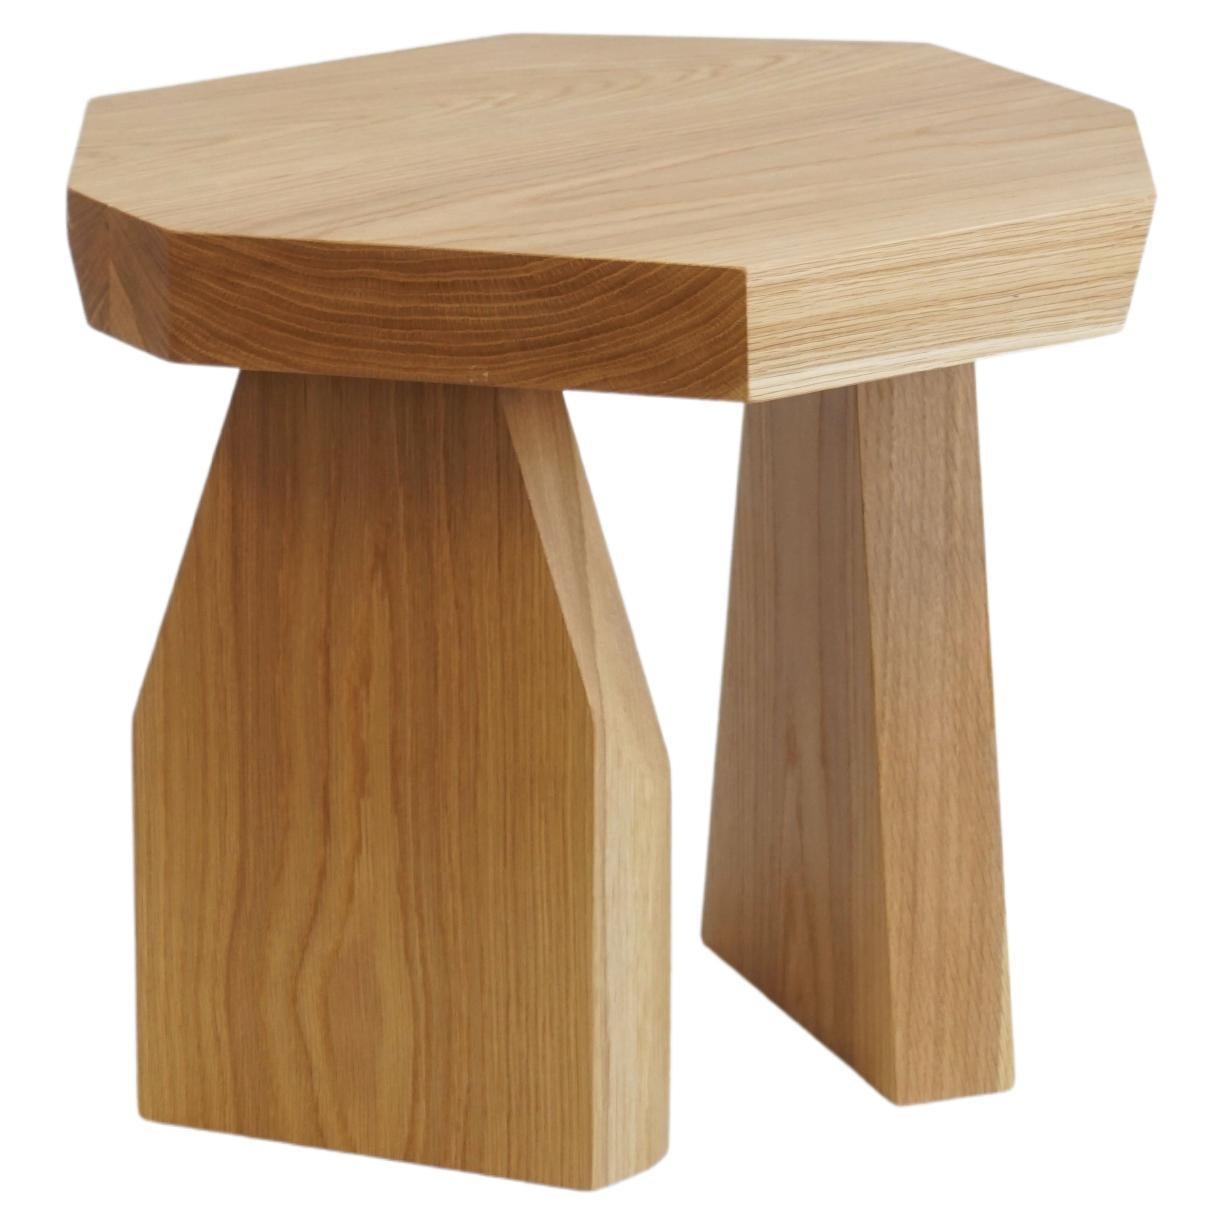 A recently made geometric organic modern style side table or stool.

Made by Last Workshop, 2023
White oak, natural satin oil finish.
Measures: 18